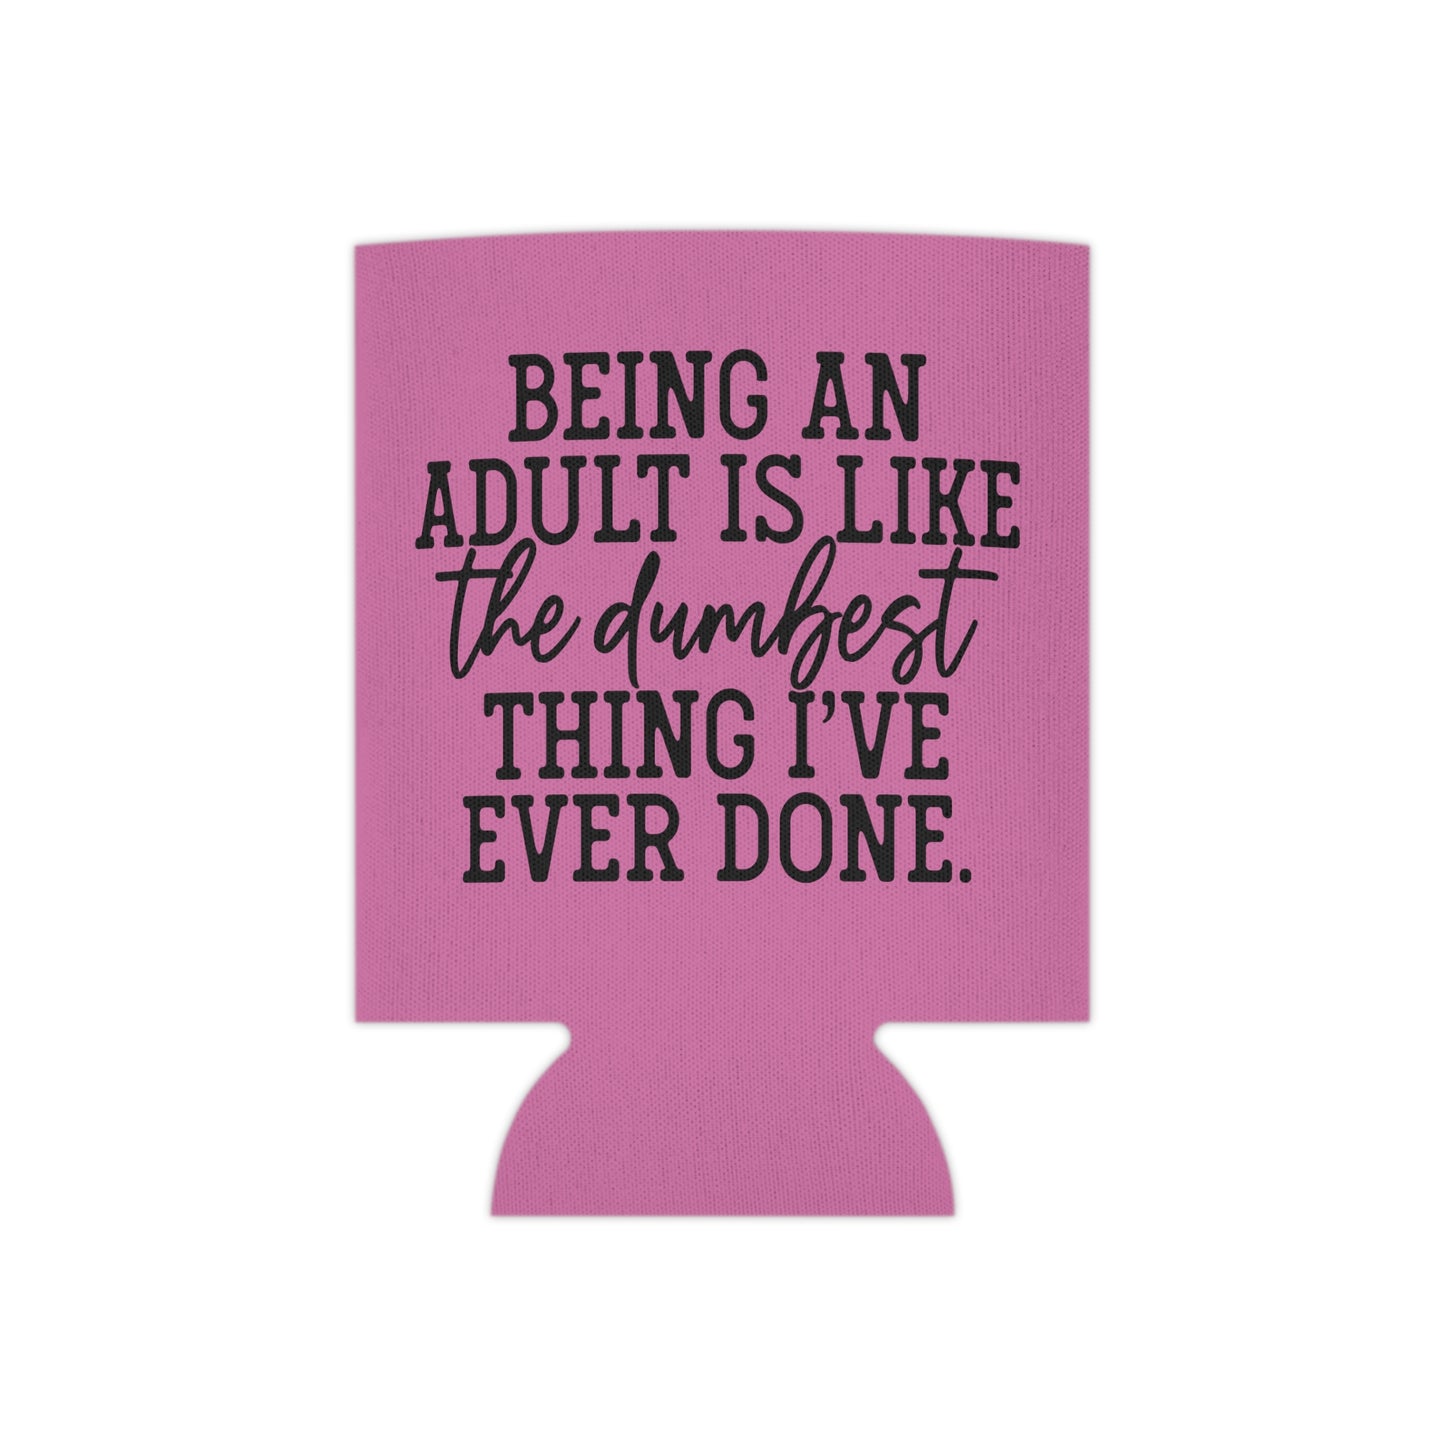 "Being an Adult is like the Dumbest Thing I've Ever Done" Can Cooler- Pink